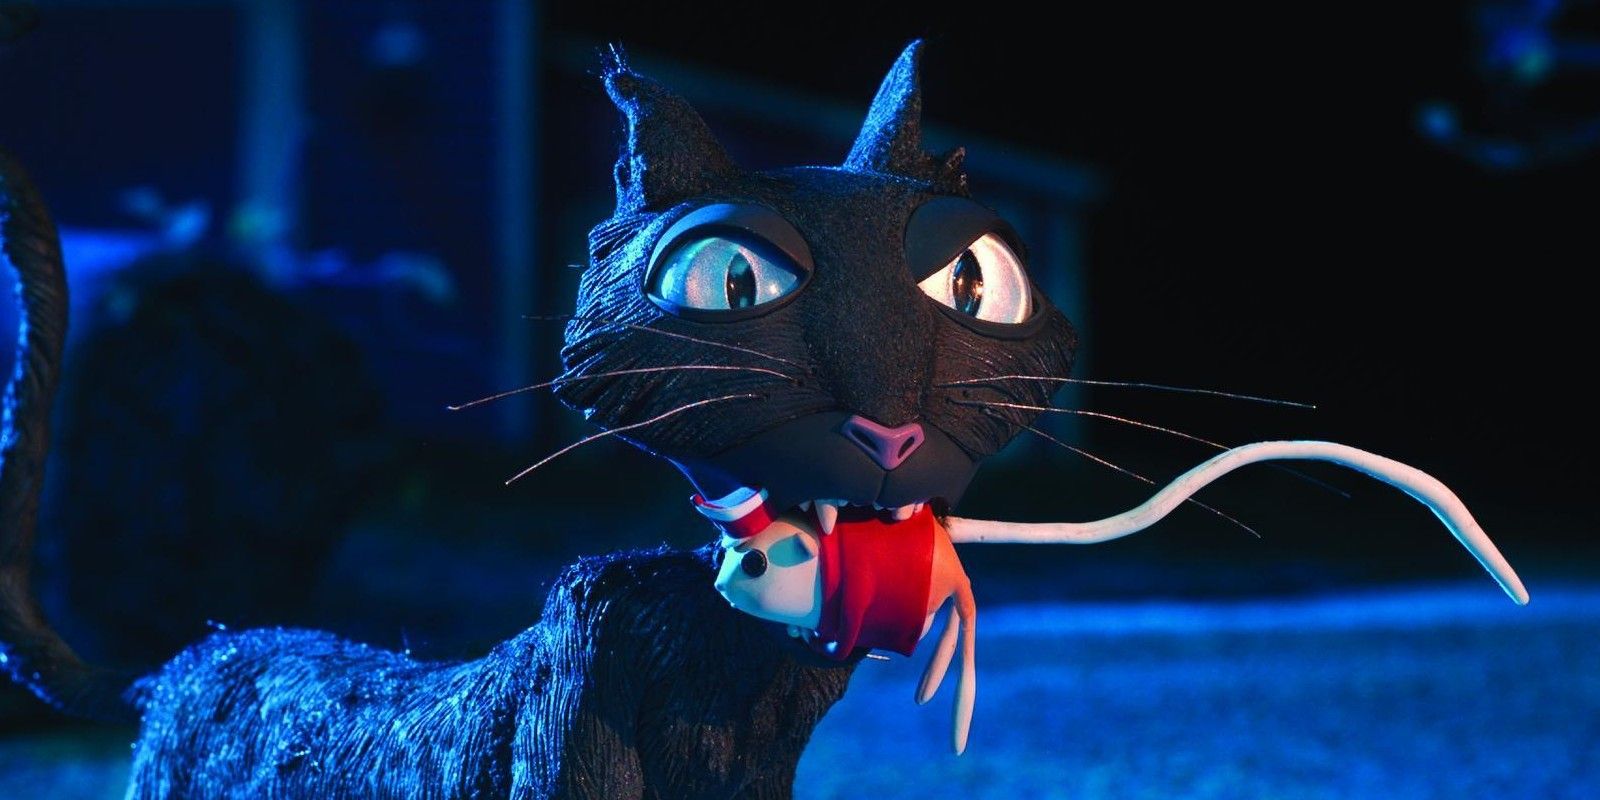 The Cat holding a mouse in its mouth in Coraline.